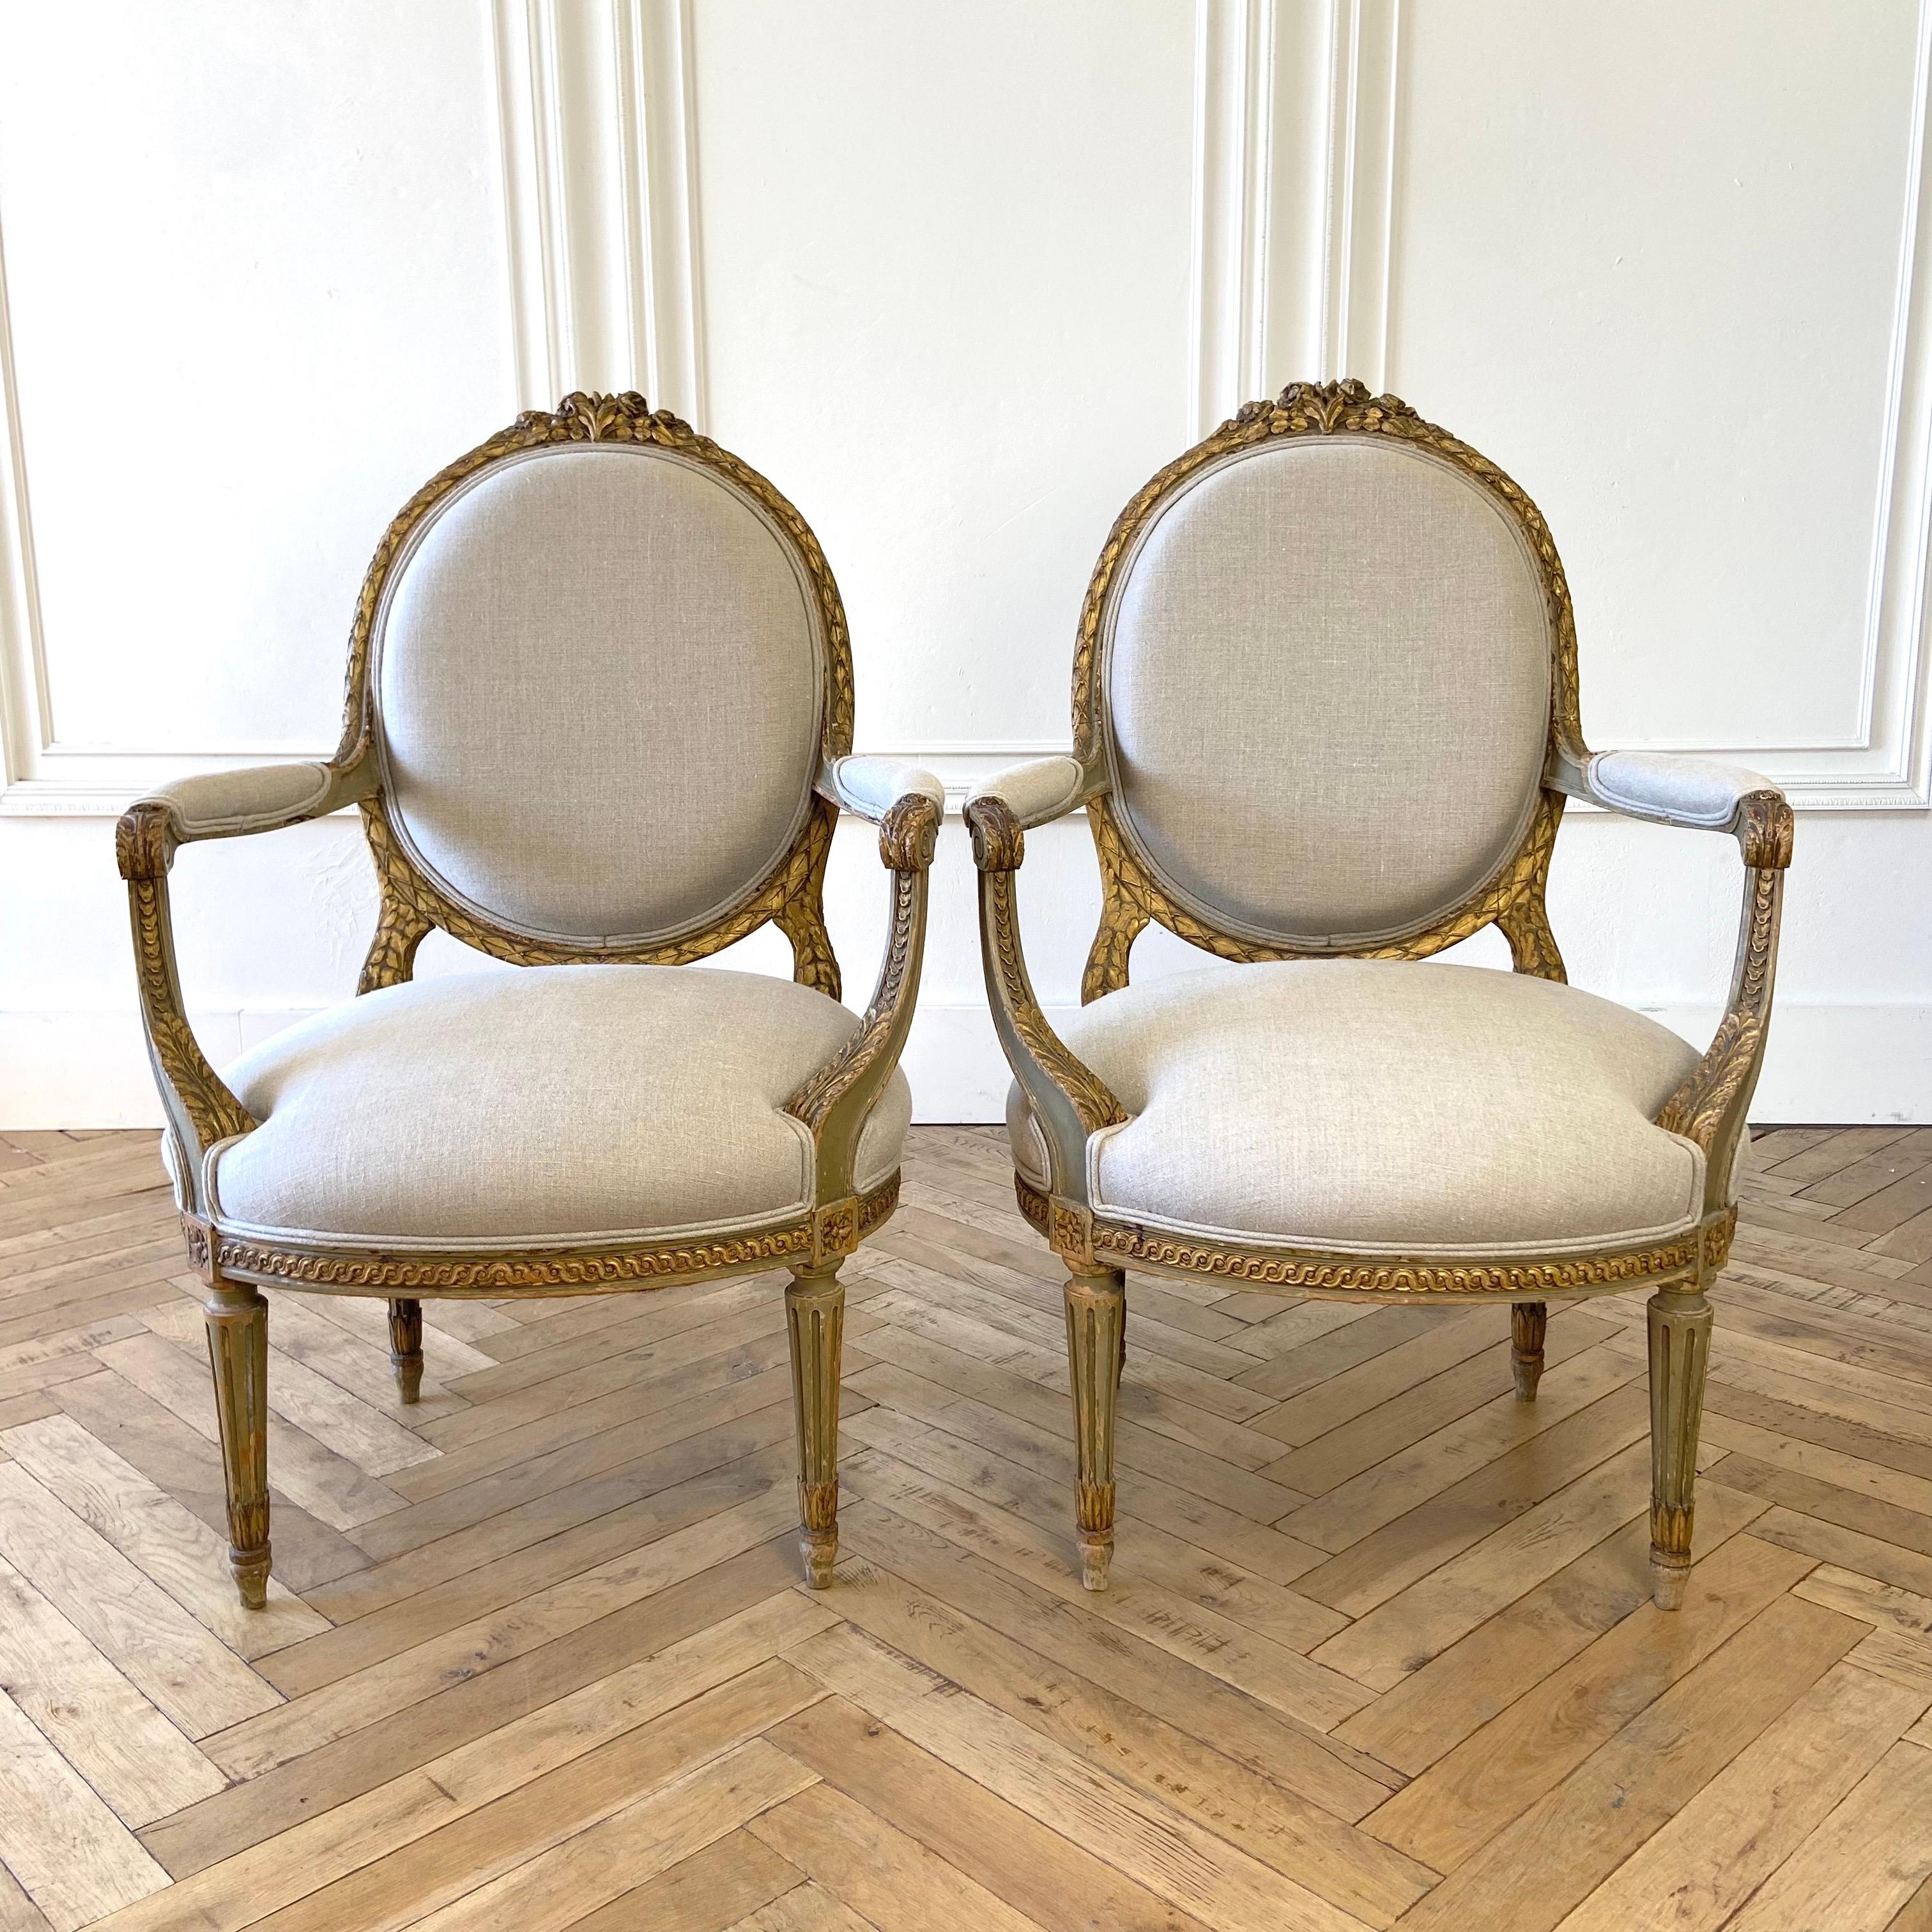 Pair of Antique original paint and giltwood open arm chairs
Painted in the grayish-green with gold gilt, subtle aged patina is natural from use and age. Reupholstered in Libeco Organic Flax heavy weight linen, finished with a welt.
Solid and